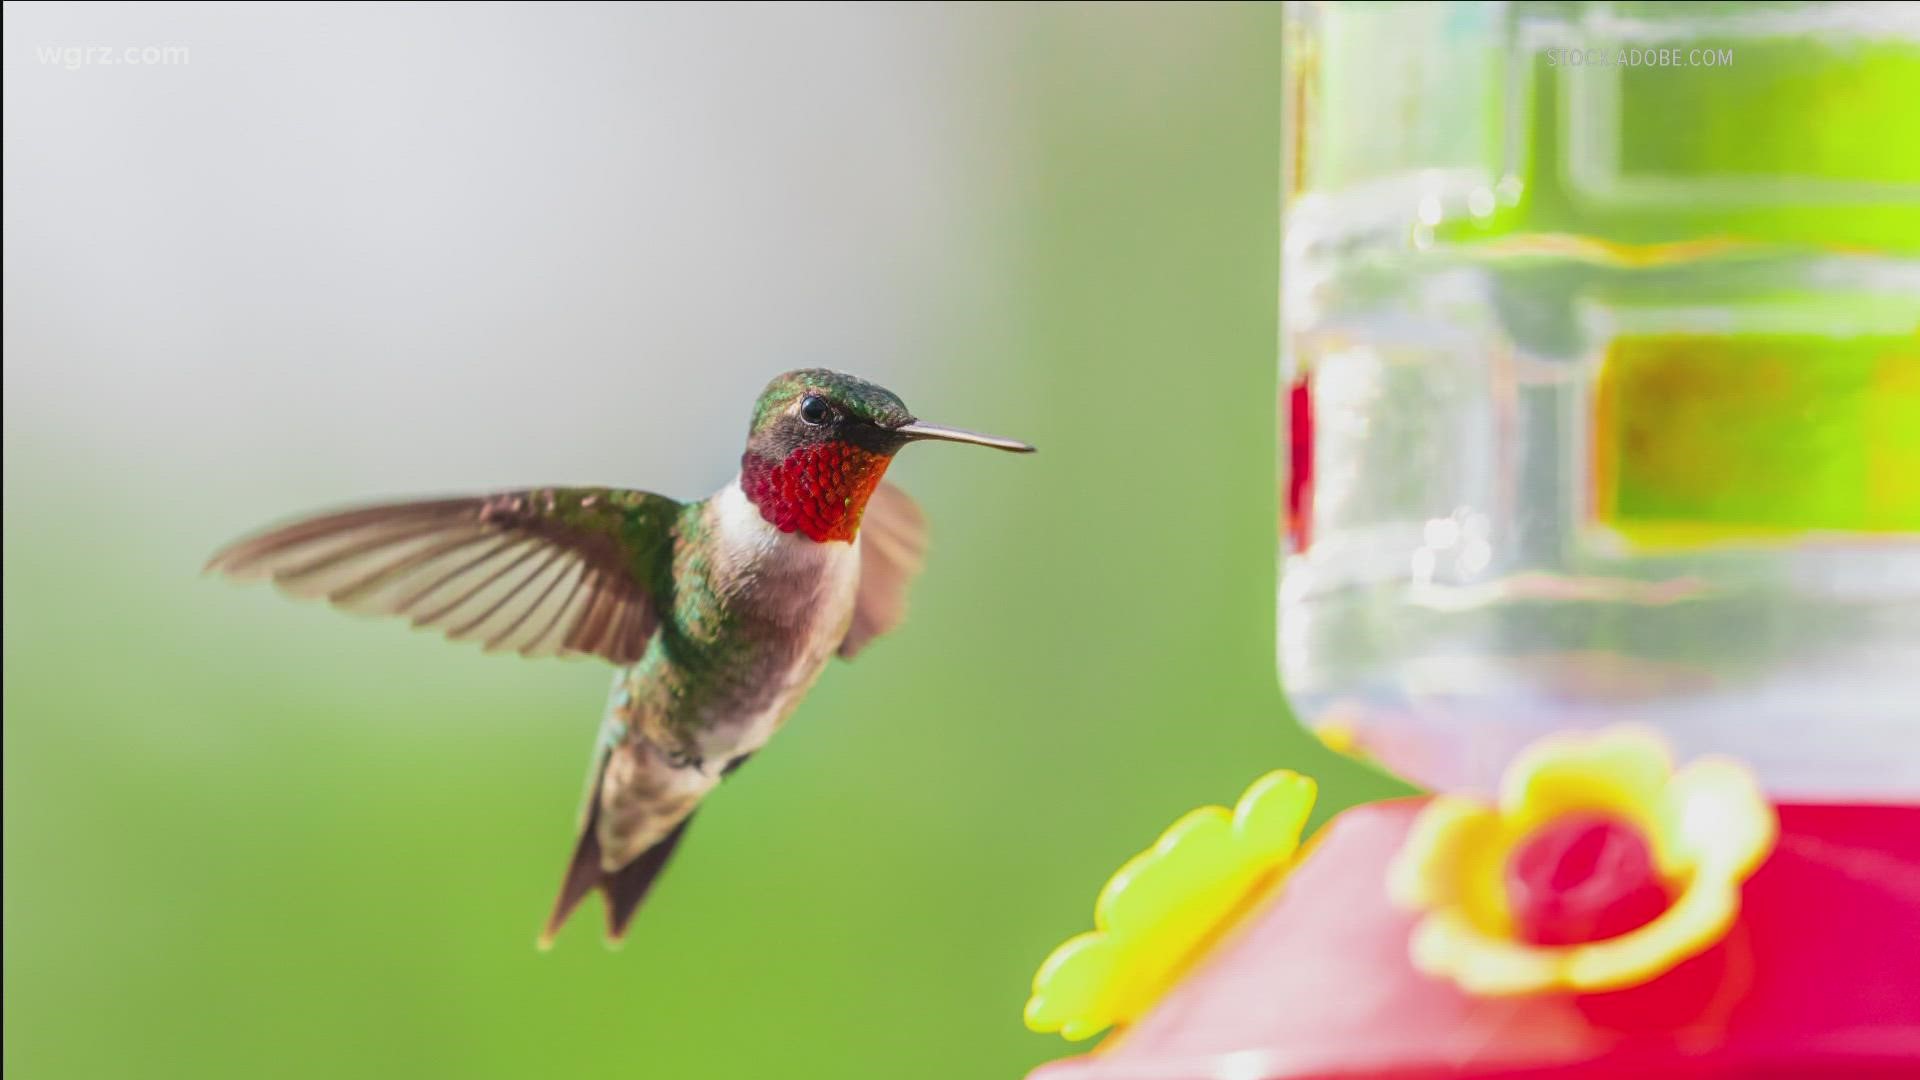 Hummingbird Central has released its Spring 2022 Hummingbird Migration Map and Sightings, and the birds have begun their migration from Mexico and Central America.